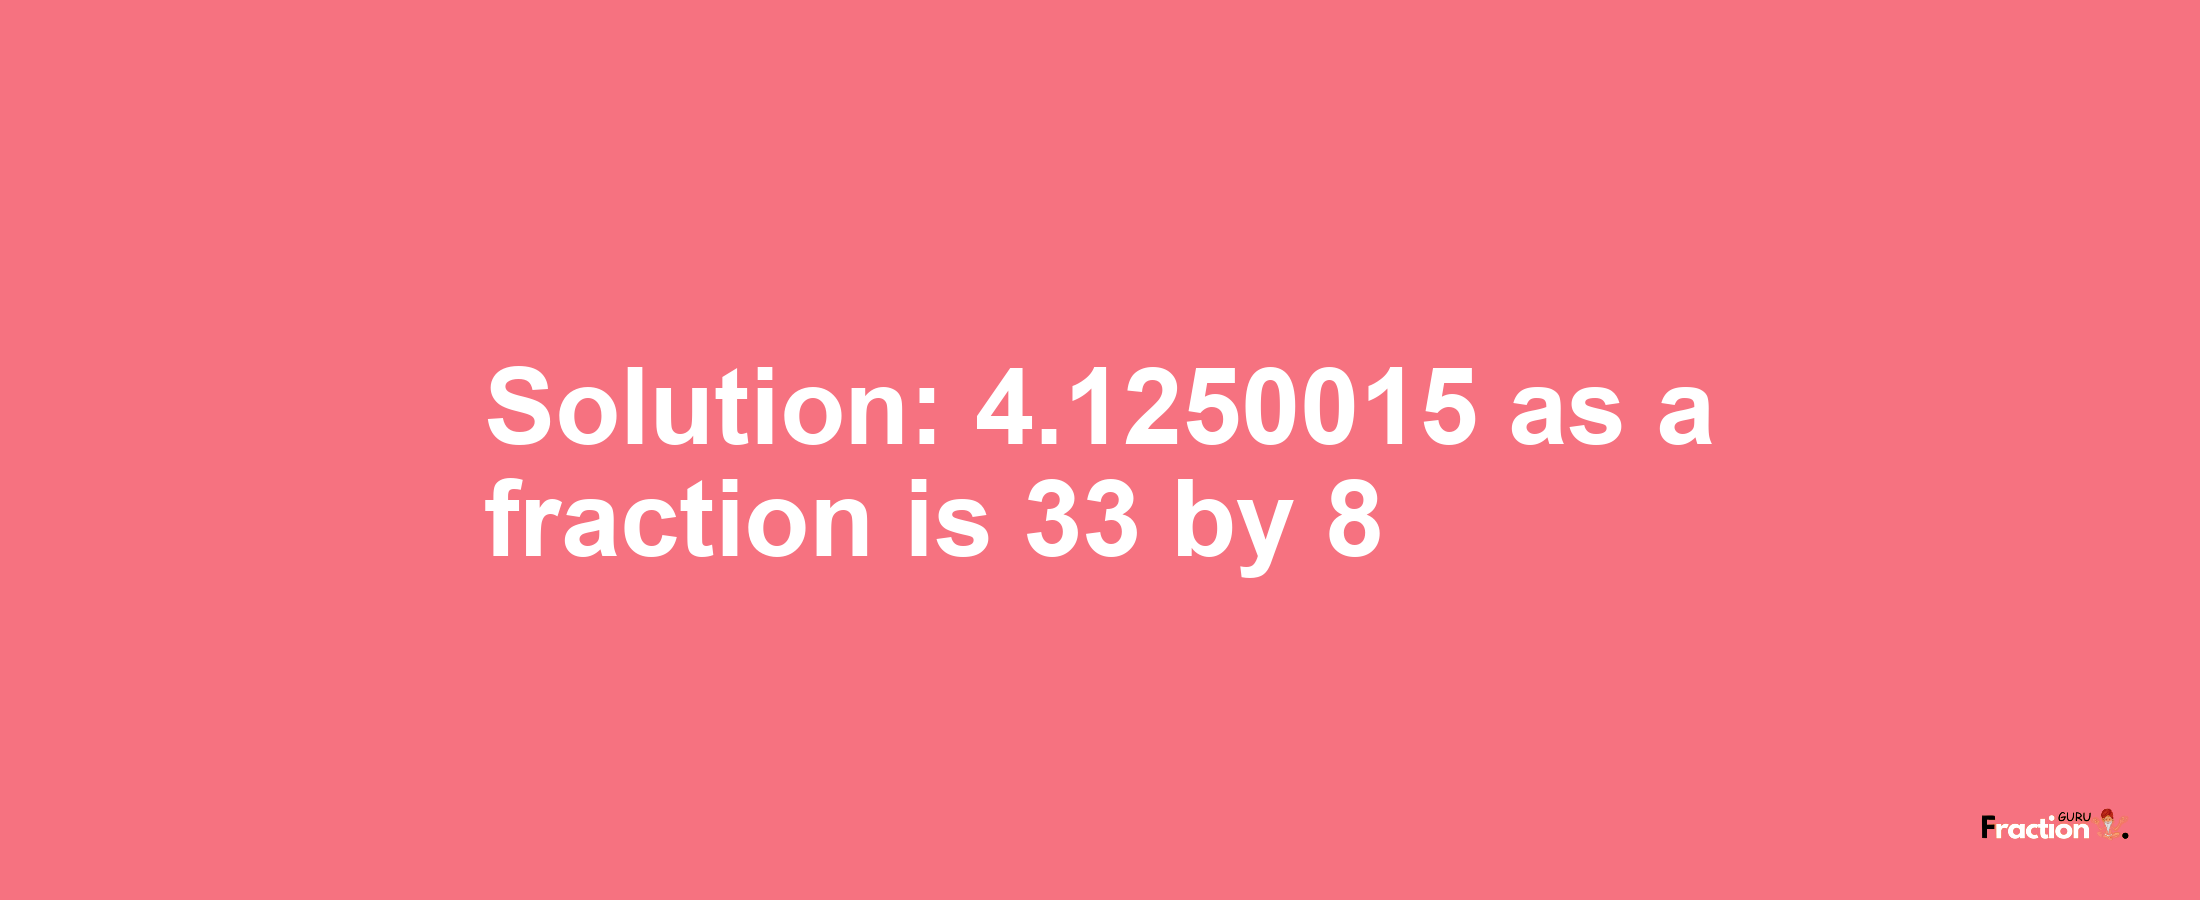 Solution:4.1250015 as a fraction is 33/8